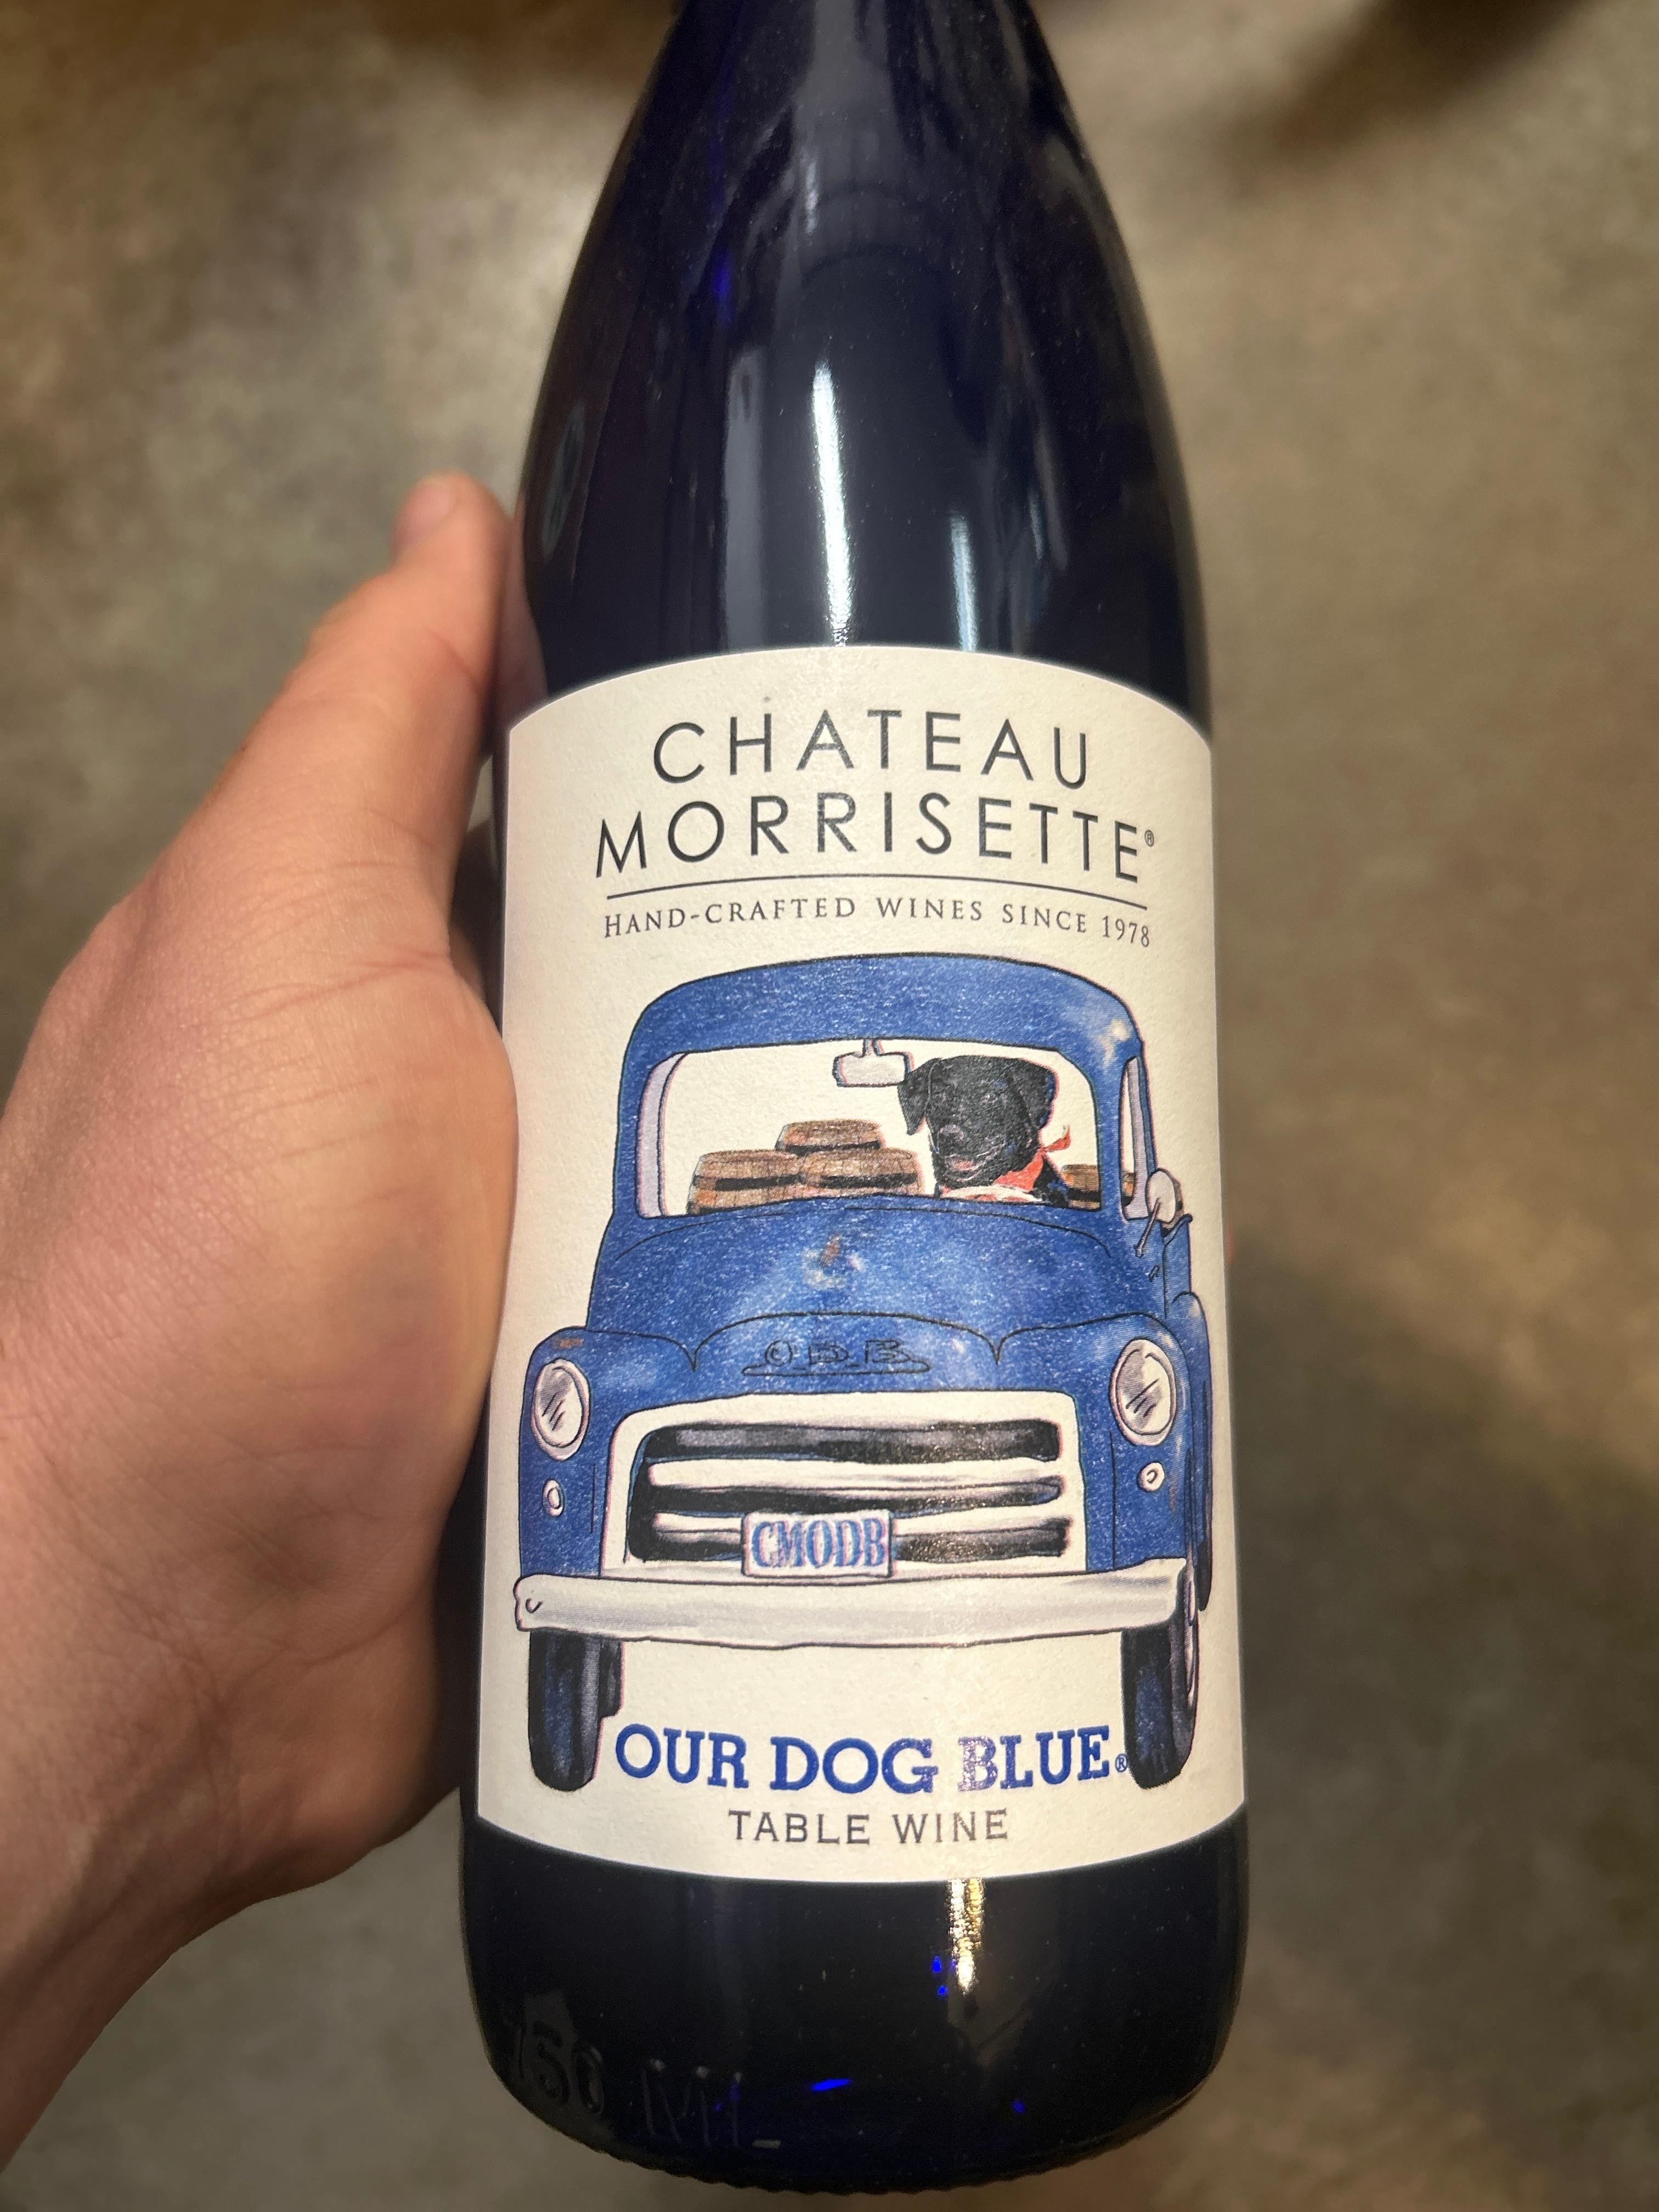 Our Dog Blue Table Wine